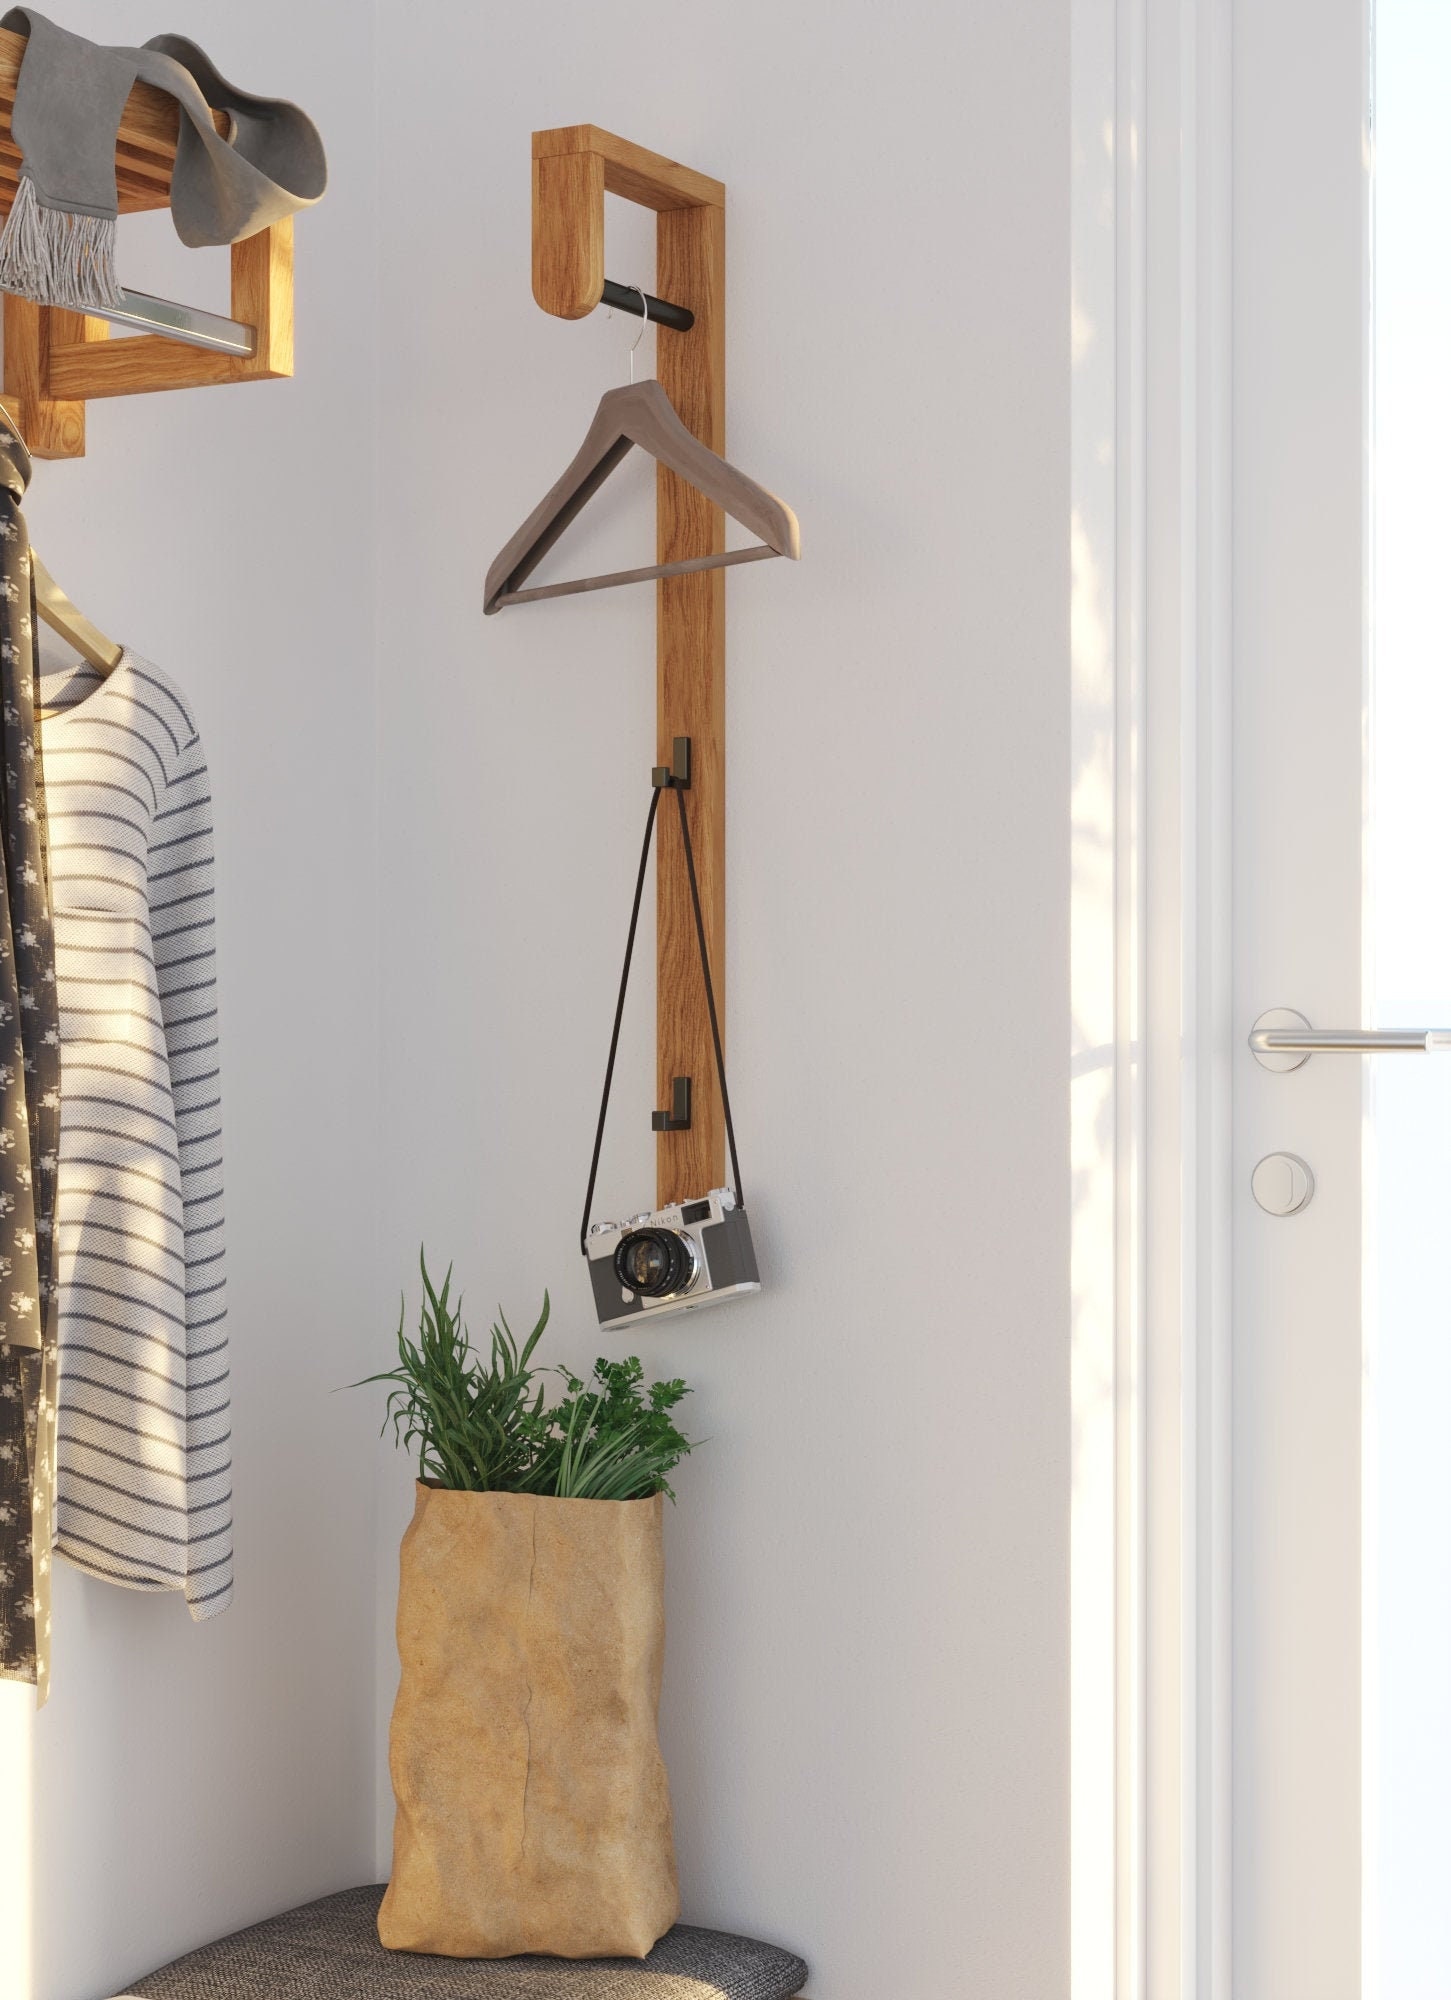 Rustic Wood & Metal Wall Mounted Towel Bar/Hanging Rod Unit for